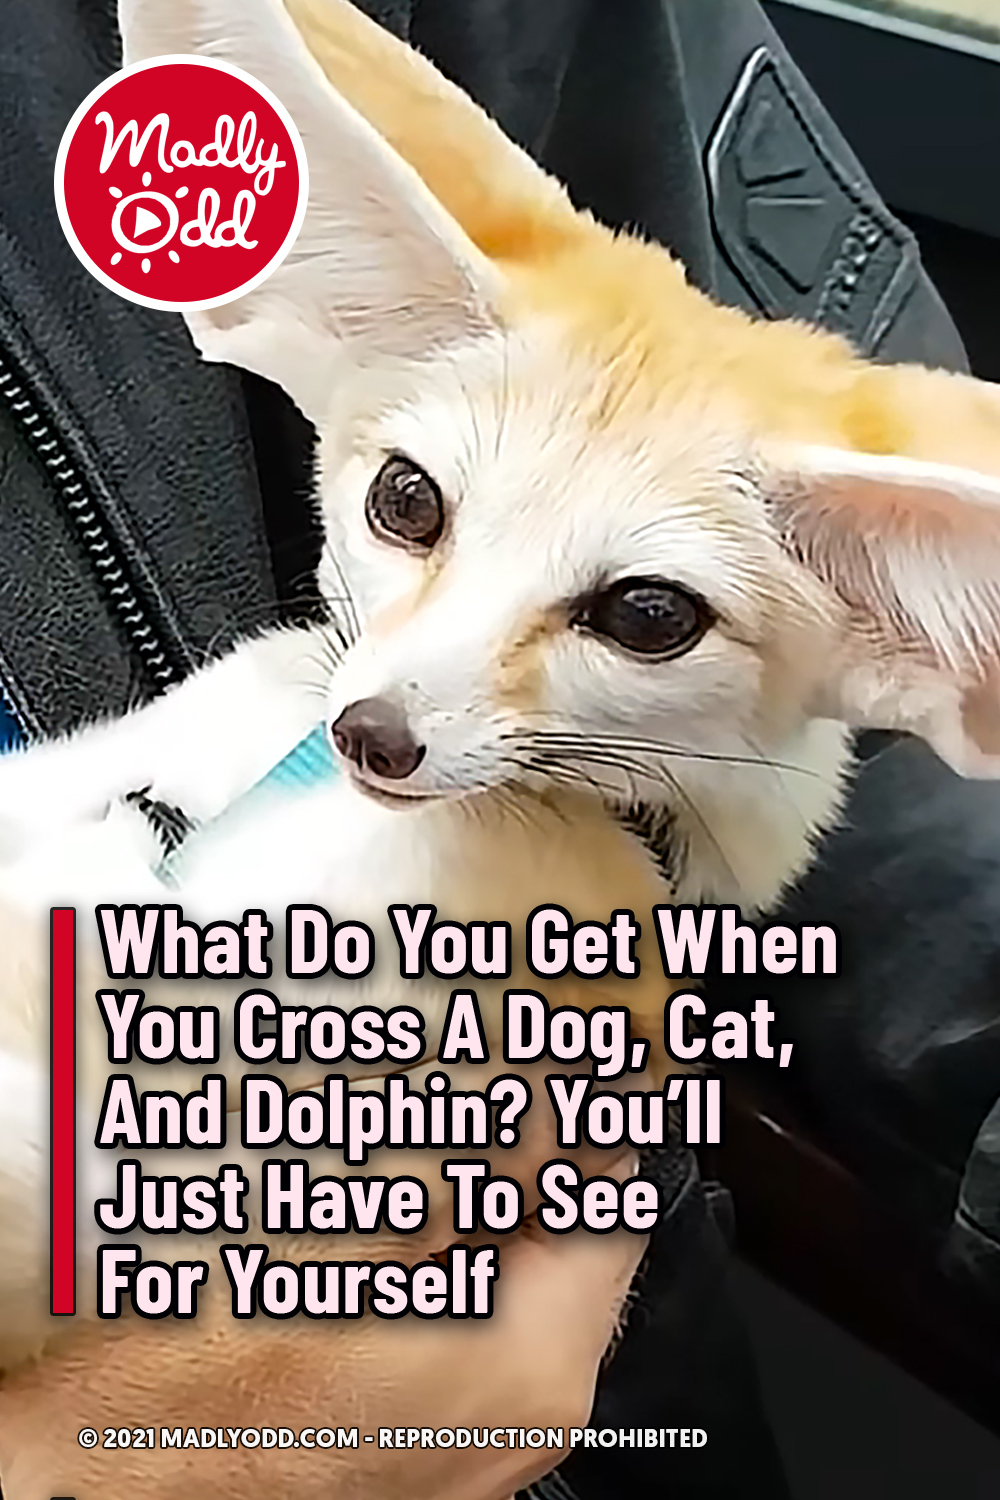 What Do You Get When You Cross A Dog, Cat, And Dolphin? You’ll Just Have To See For Yourself